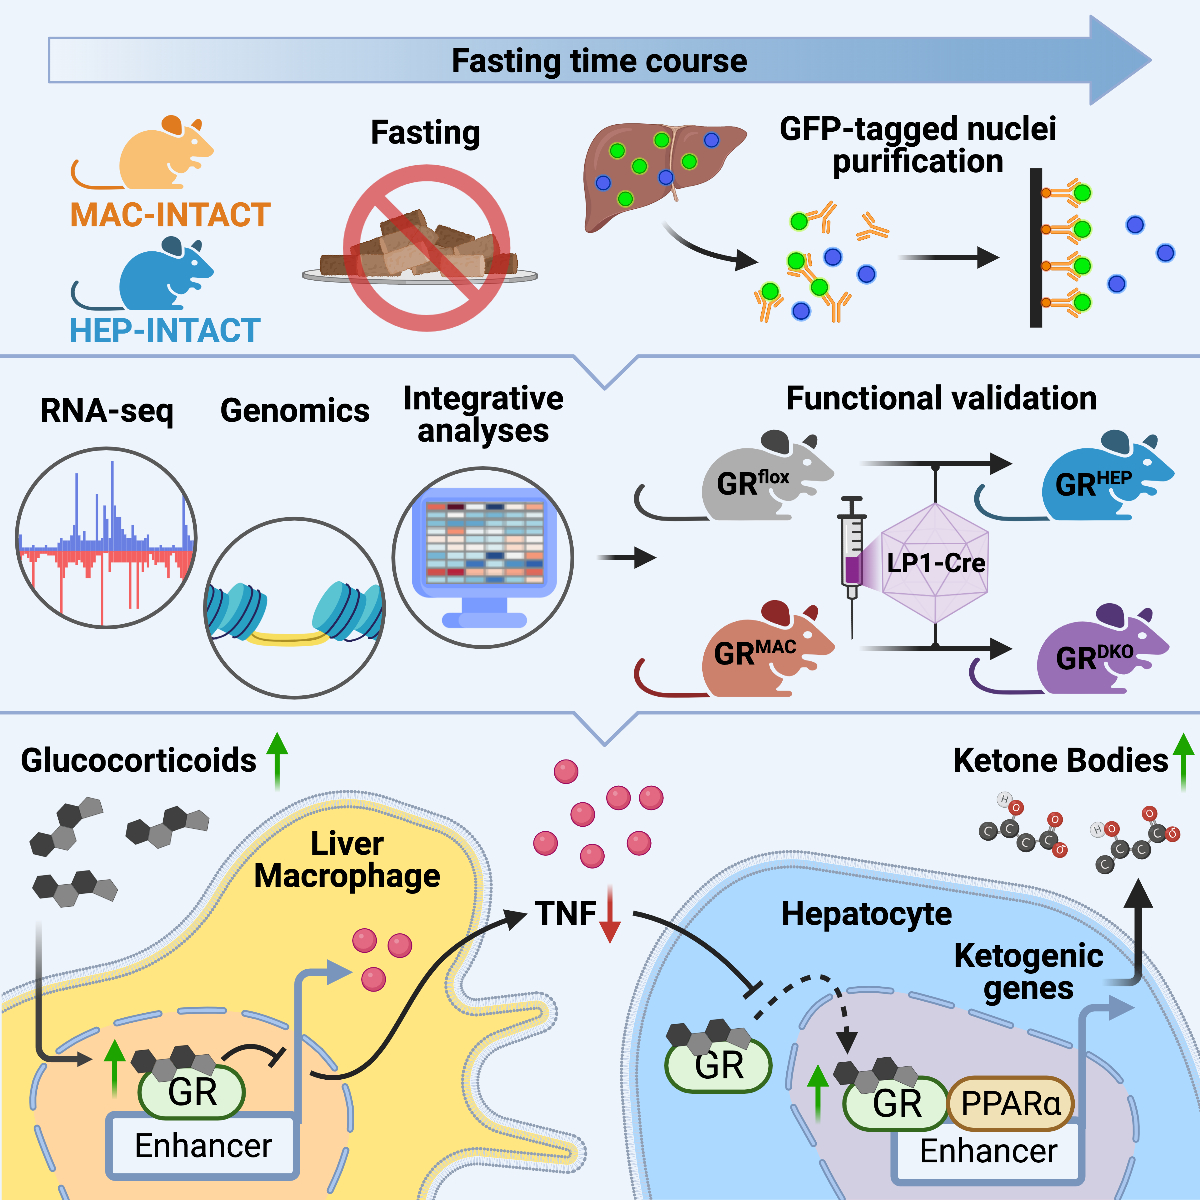 Overview figure of link between immune system and fasting metabolism in liver